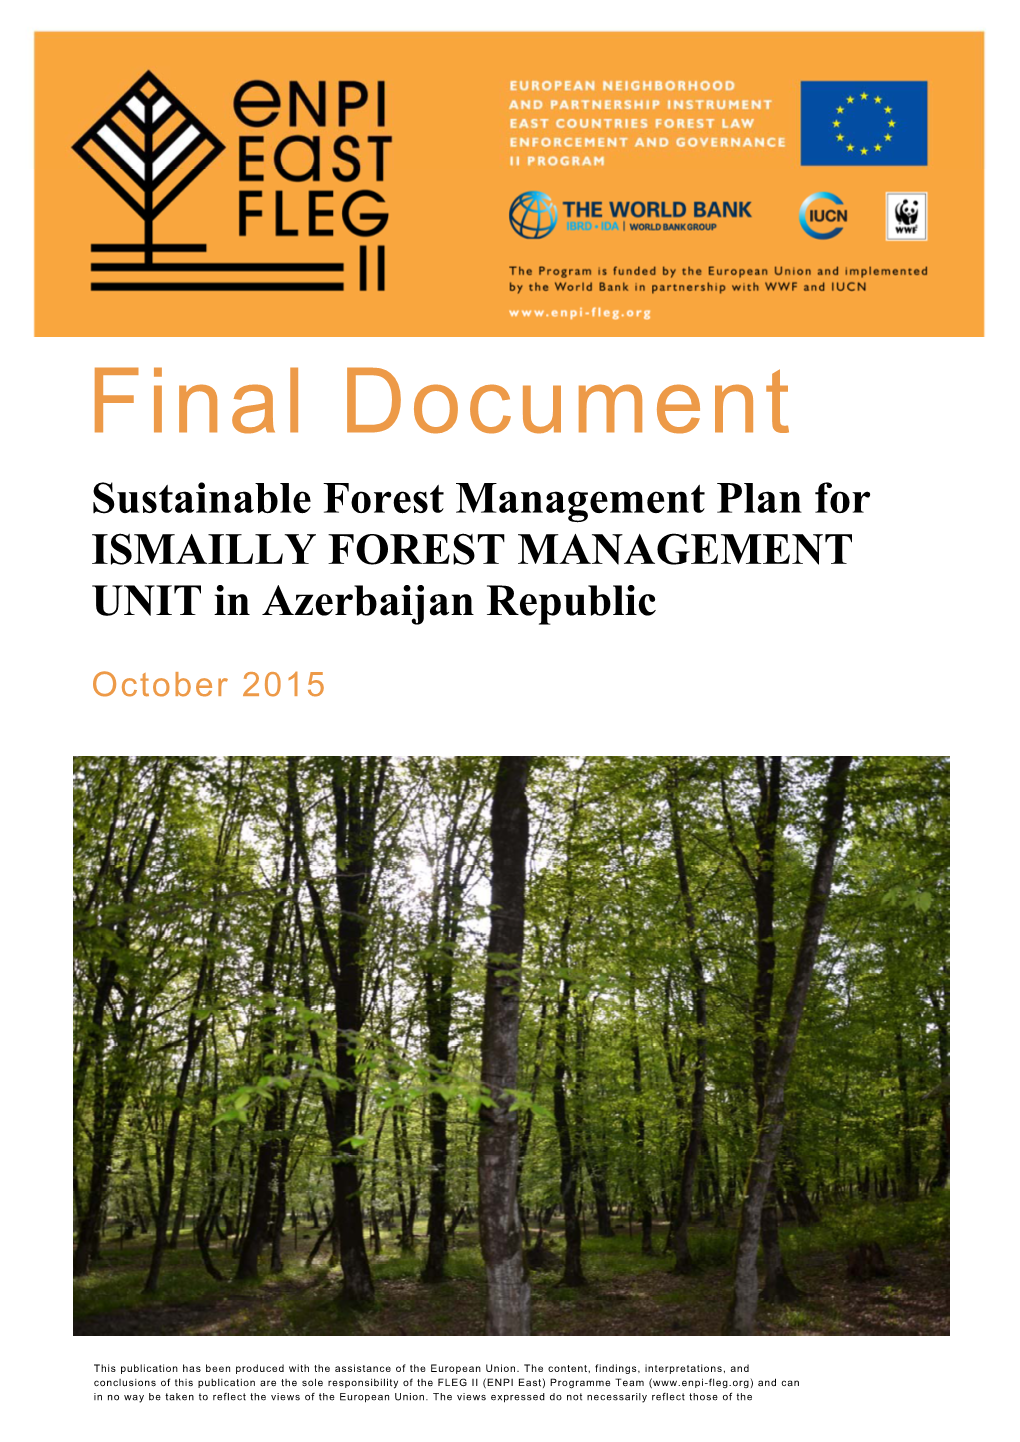 Sustainable Forest Management Plan for ISMAILLY FOREST MANAGEMENT UNIT in Azerbaijan Republic